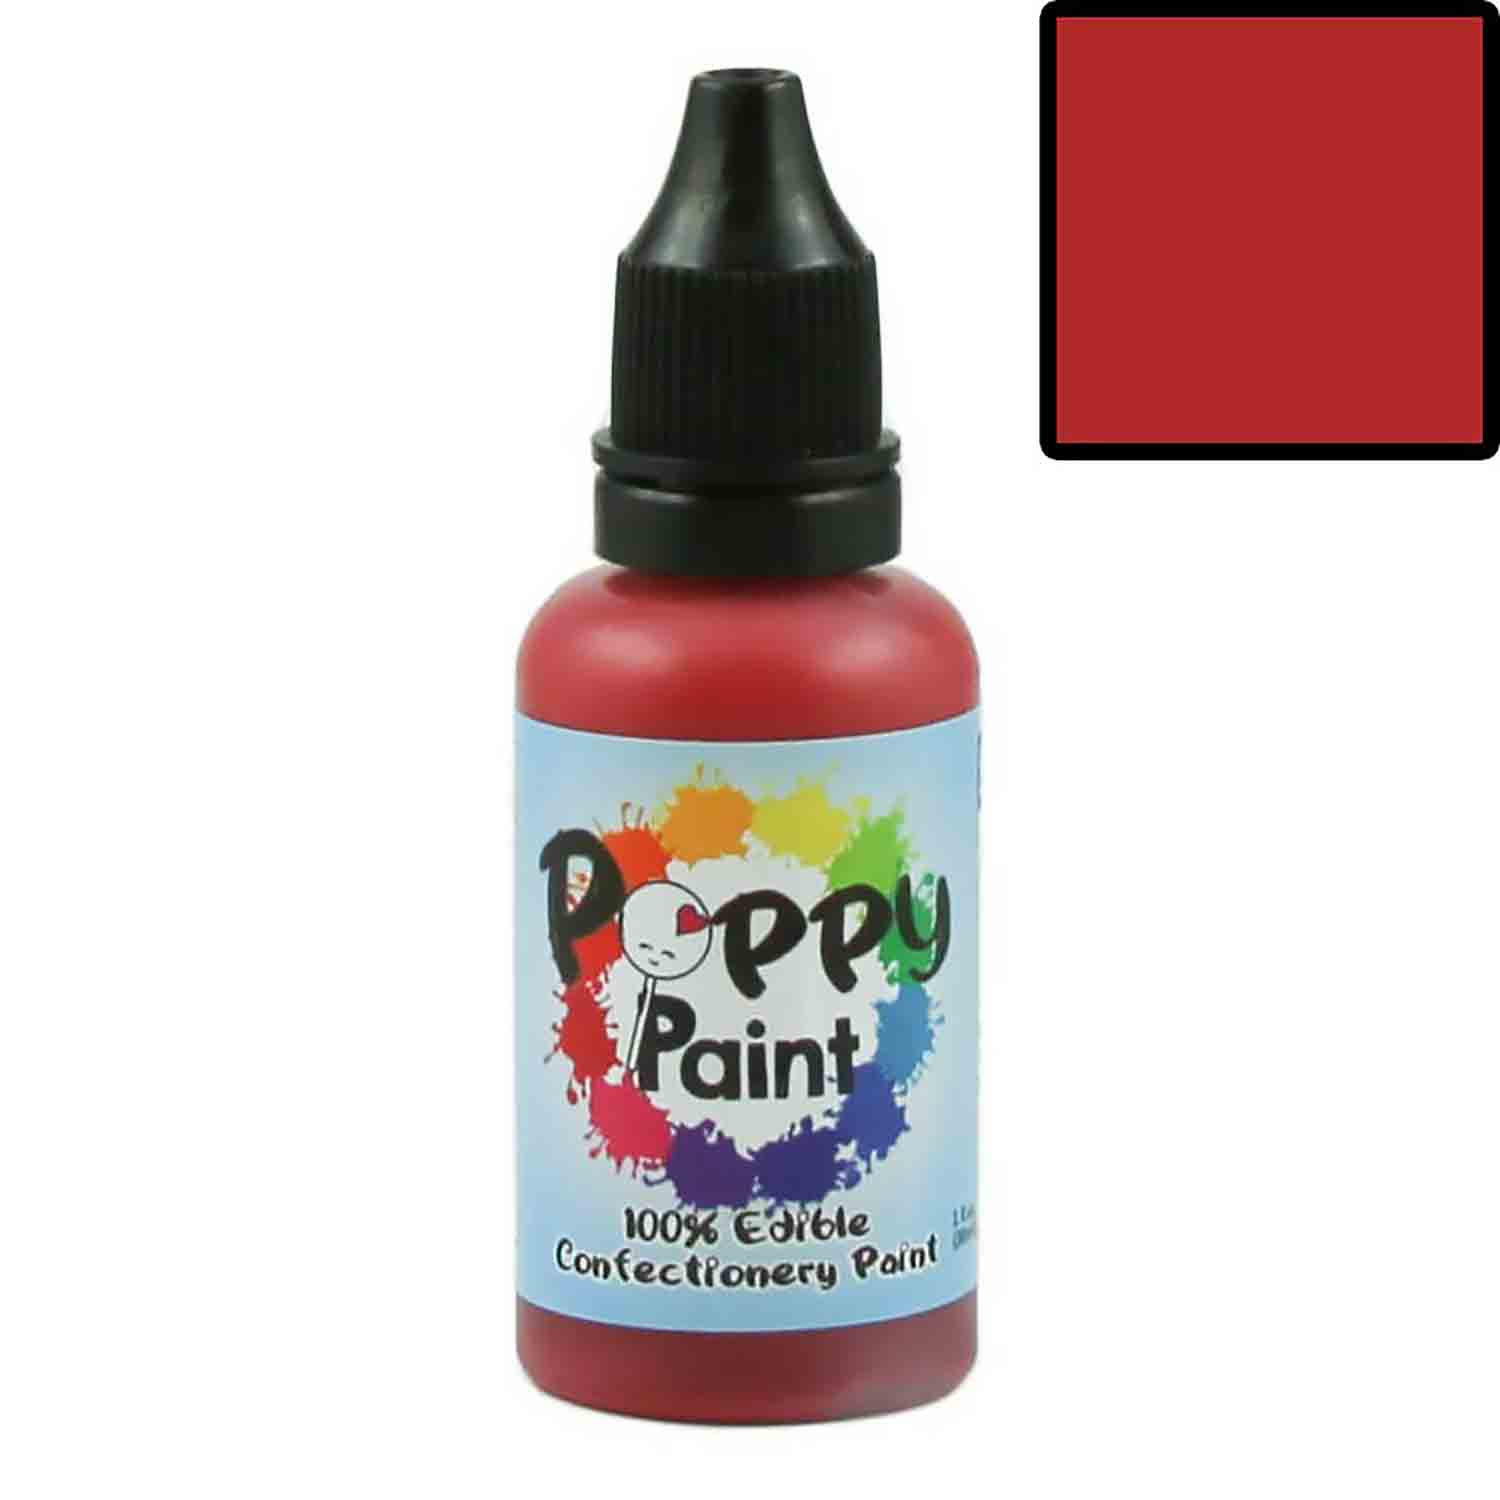 Red 100% Edible Confectionery Paint